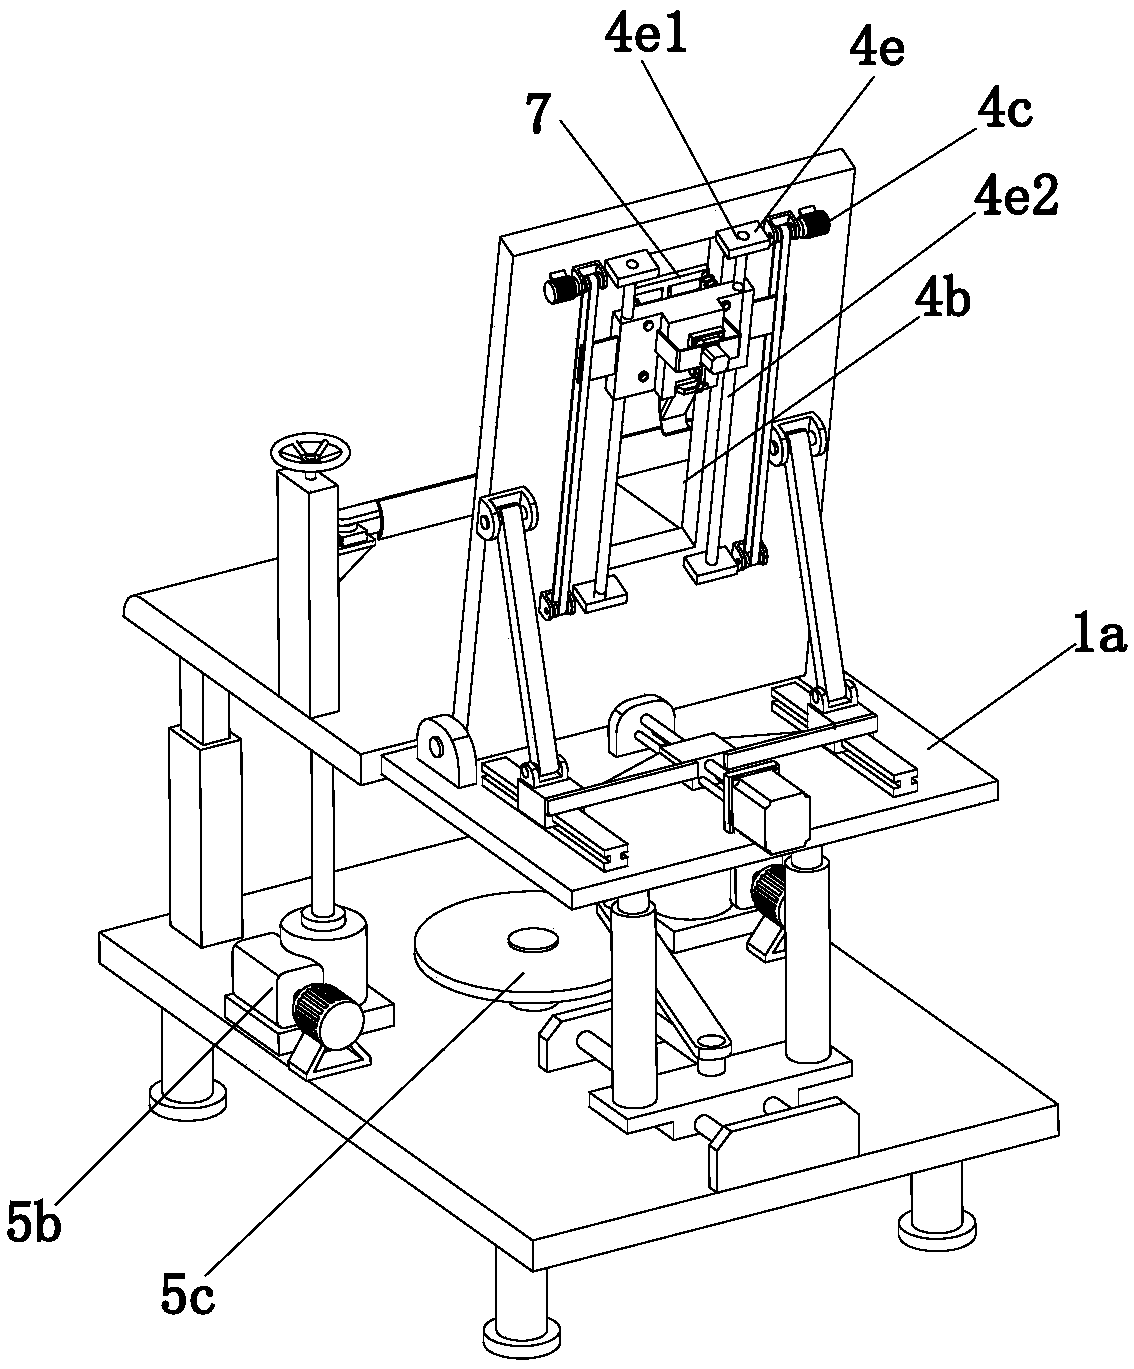 Working method of medical spinal orthopedic device